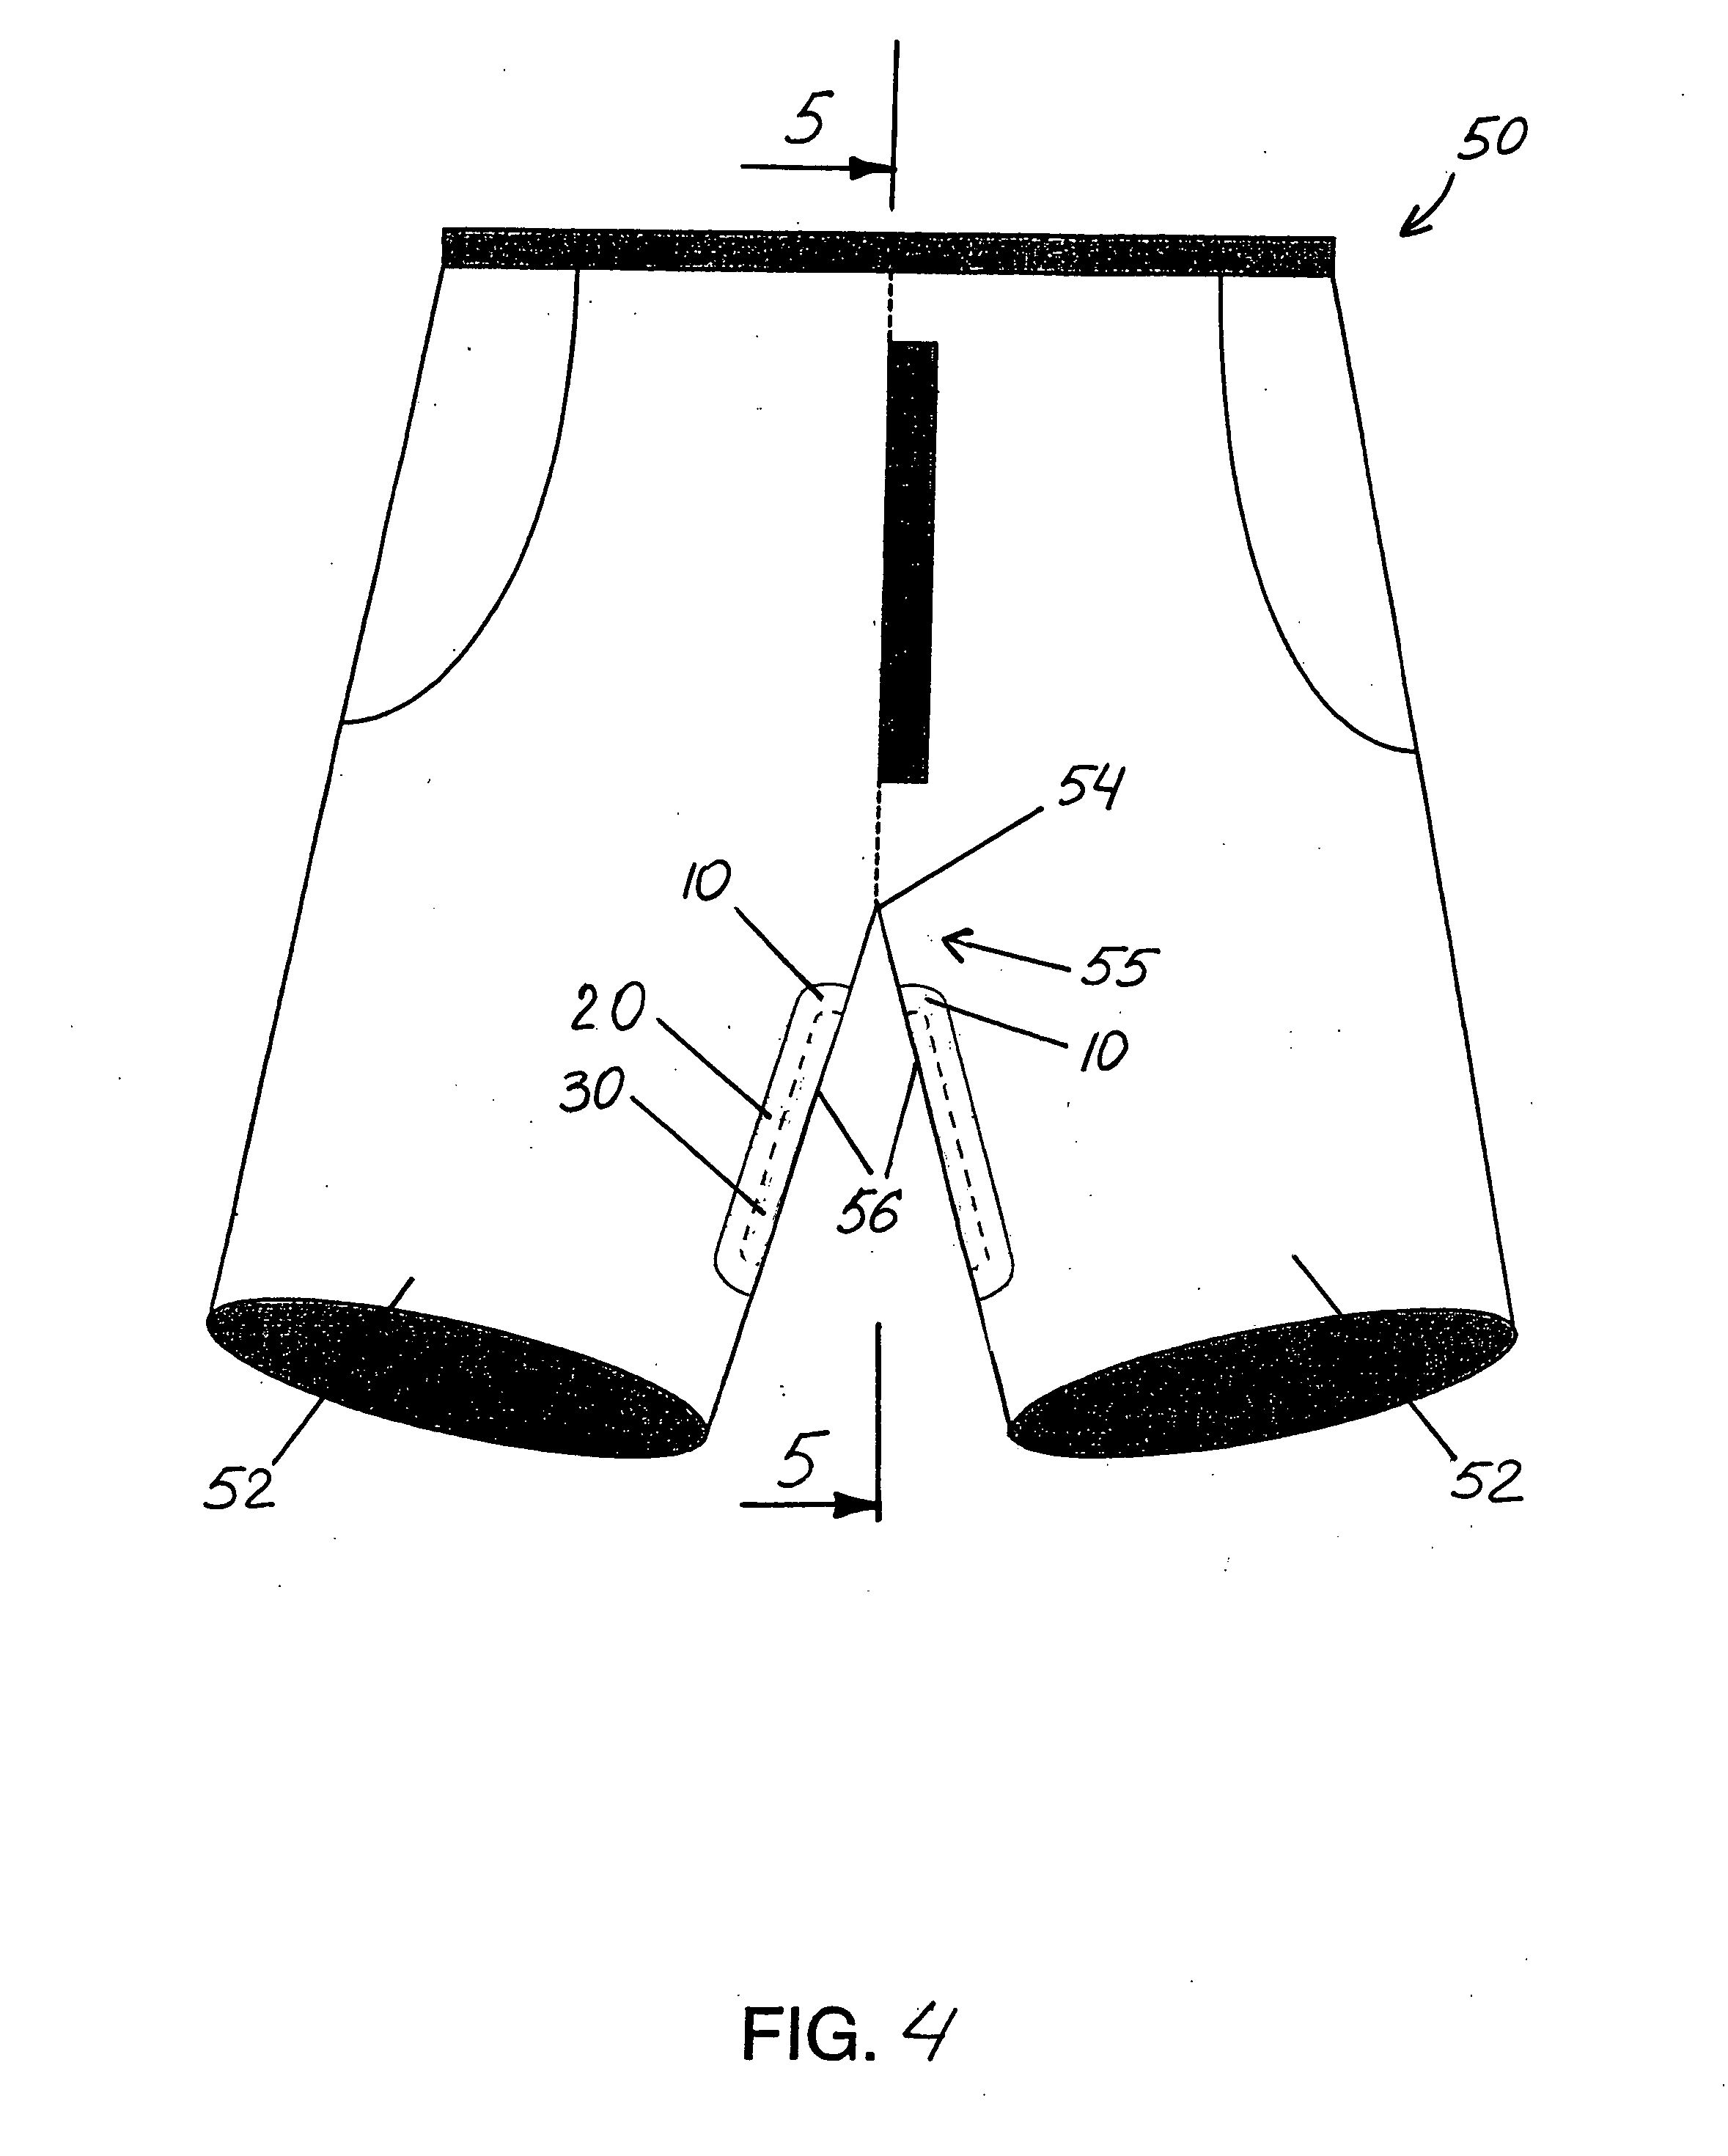 Pre-assembled anti-creep waist-clothing stay device and method of reinforcing crotch-adjacent inner-seam areas